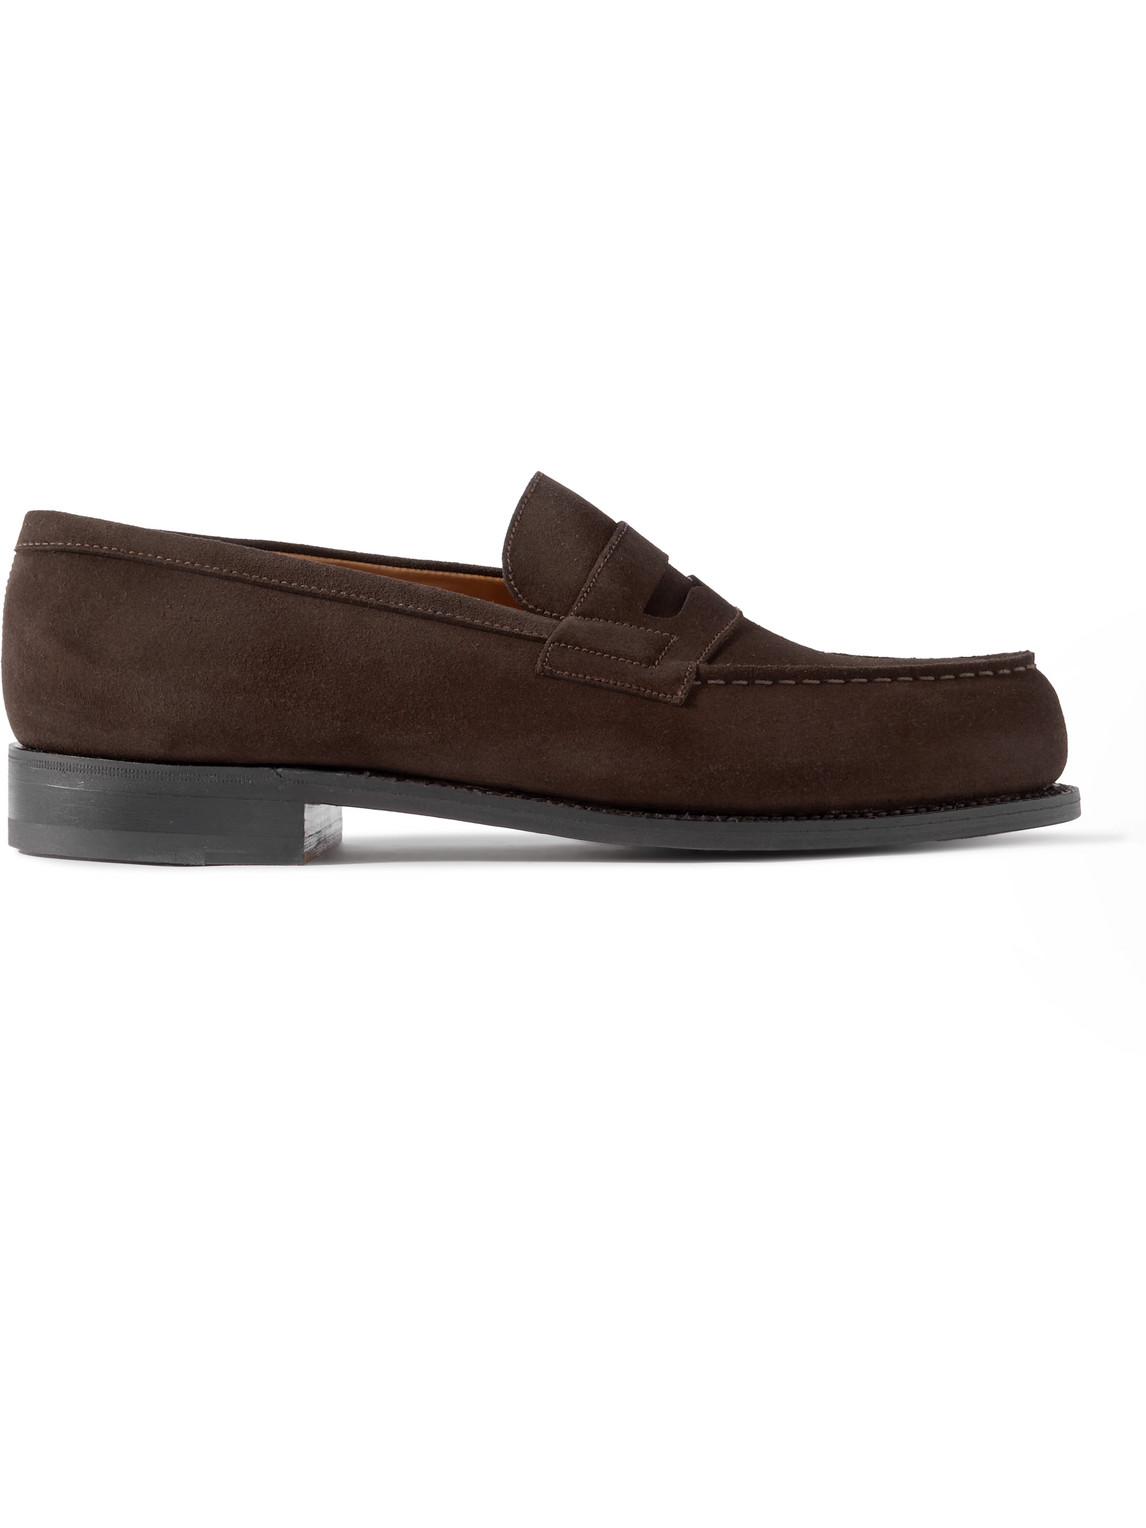 J.M. Weston 180 Moccasin Suede Penny Loafers